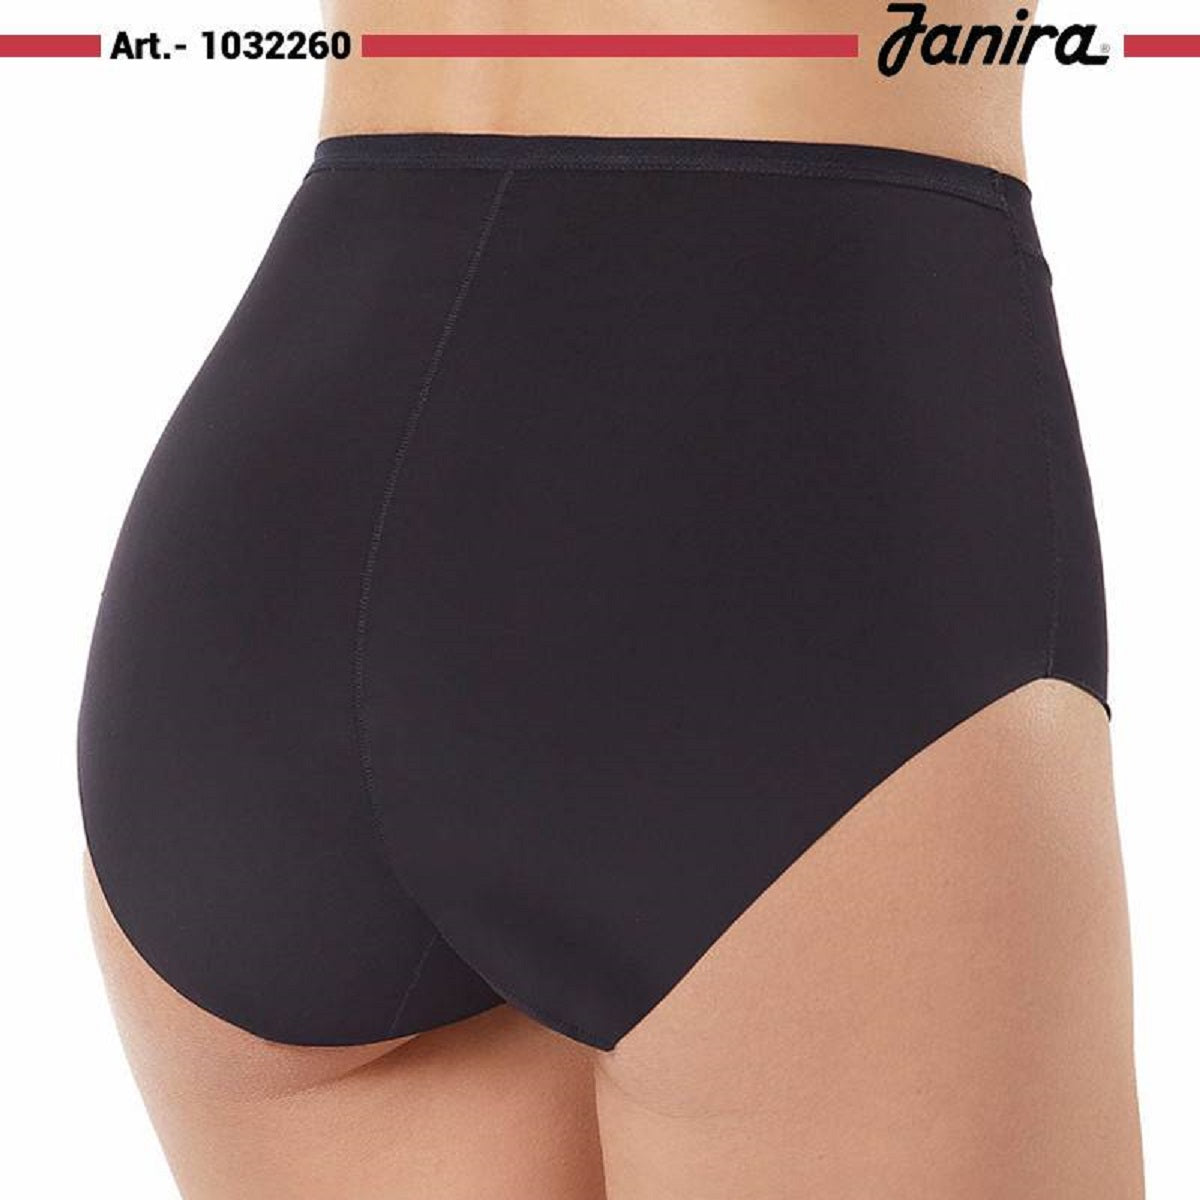 Janira On the Go Ladies Full Briefs ~ Active Day ~ Breathable ~ Antibacterial ~ Invisible ~ 1032260